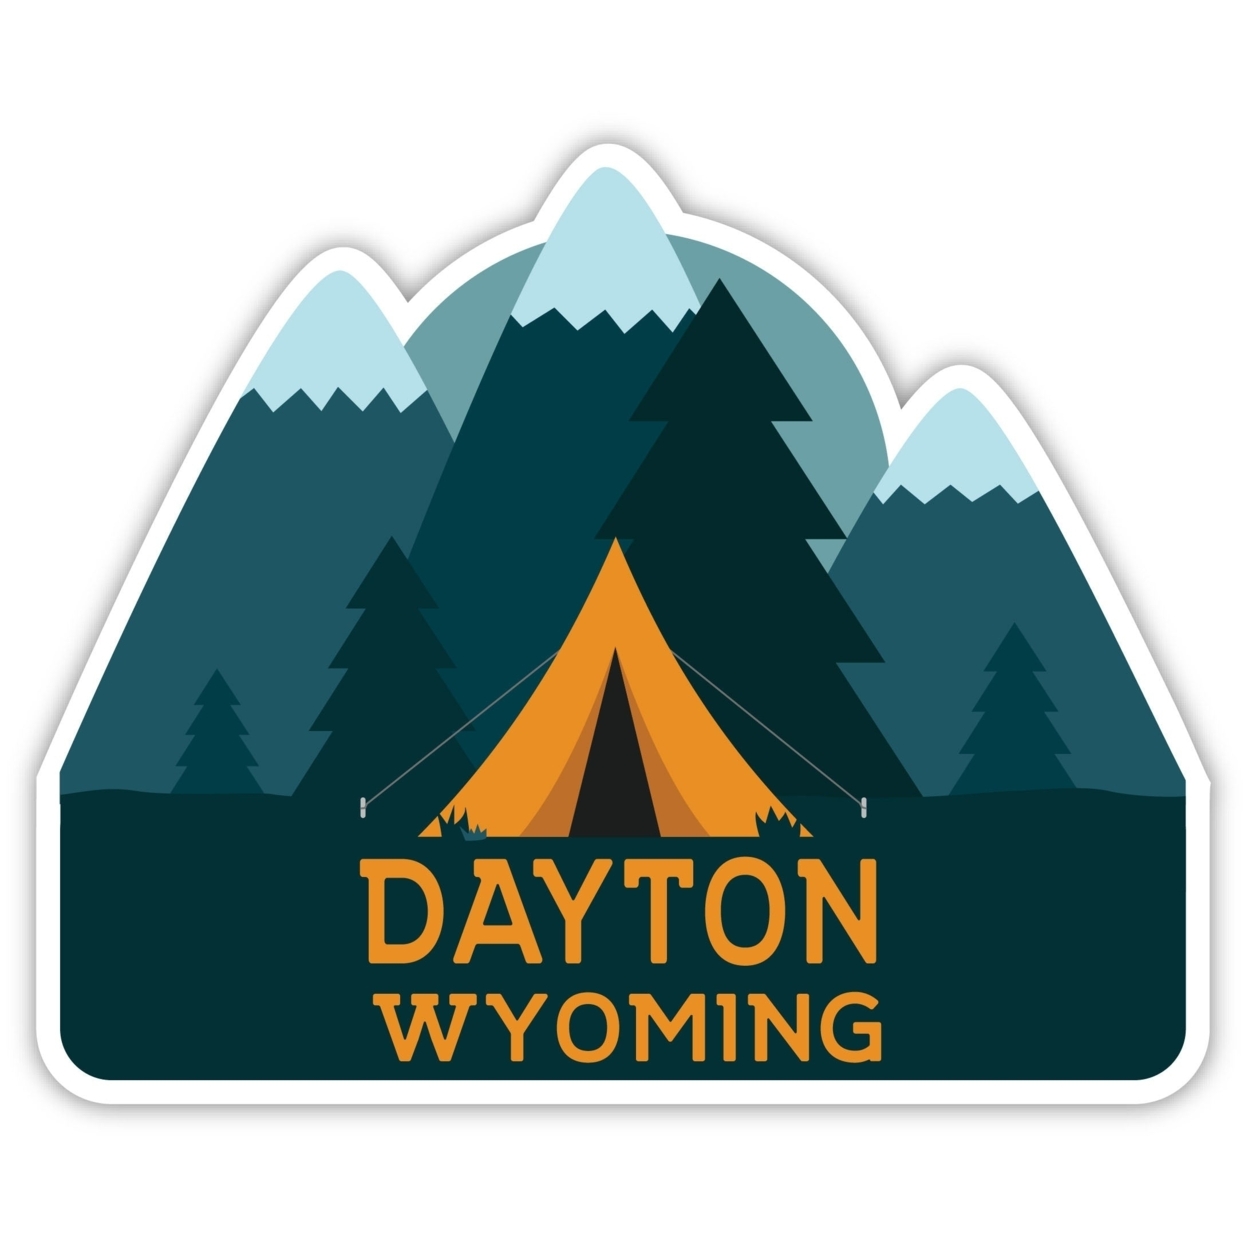 Dayton Wyoming Souvenir Decorative Stickers (Choose Theme And Size) - 4-Pack, 6-Inch, Tent